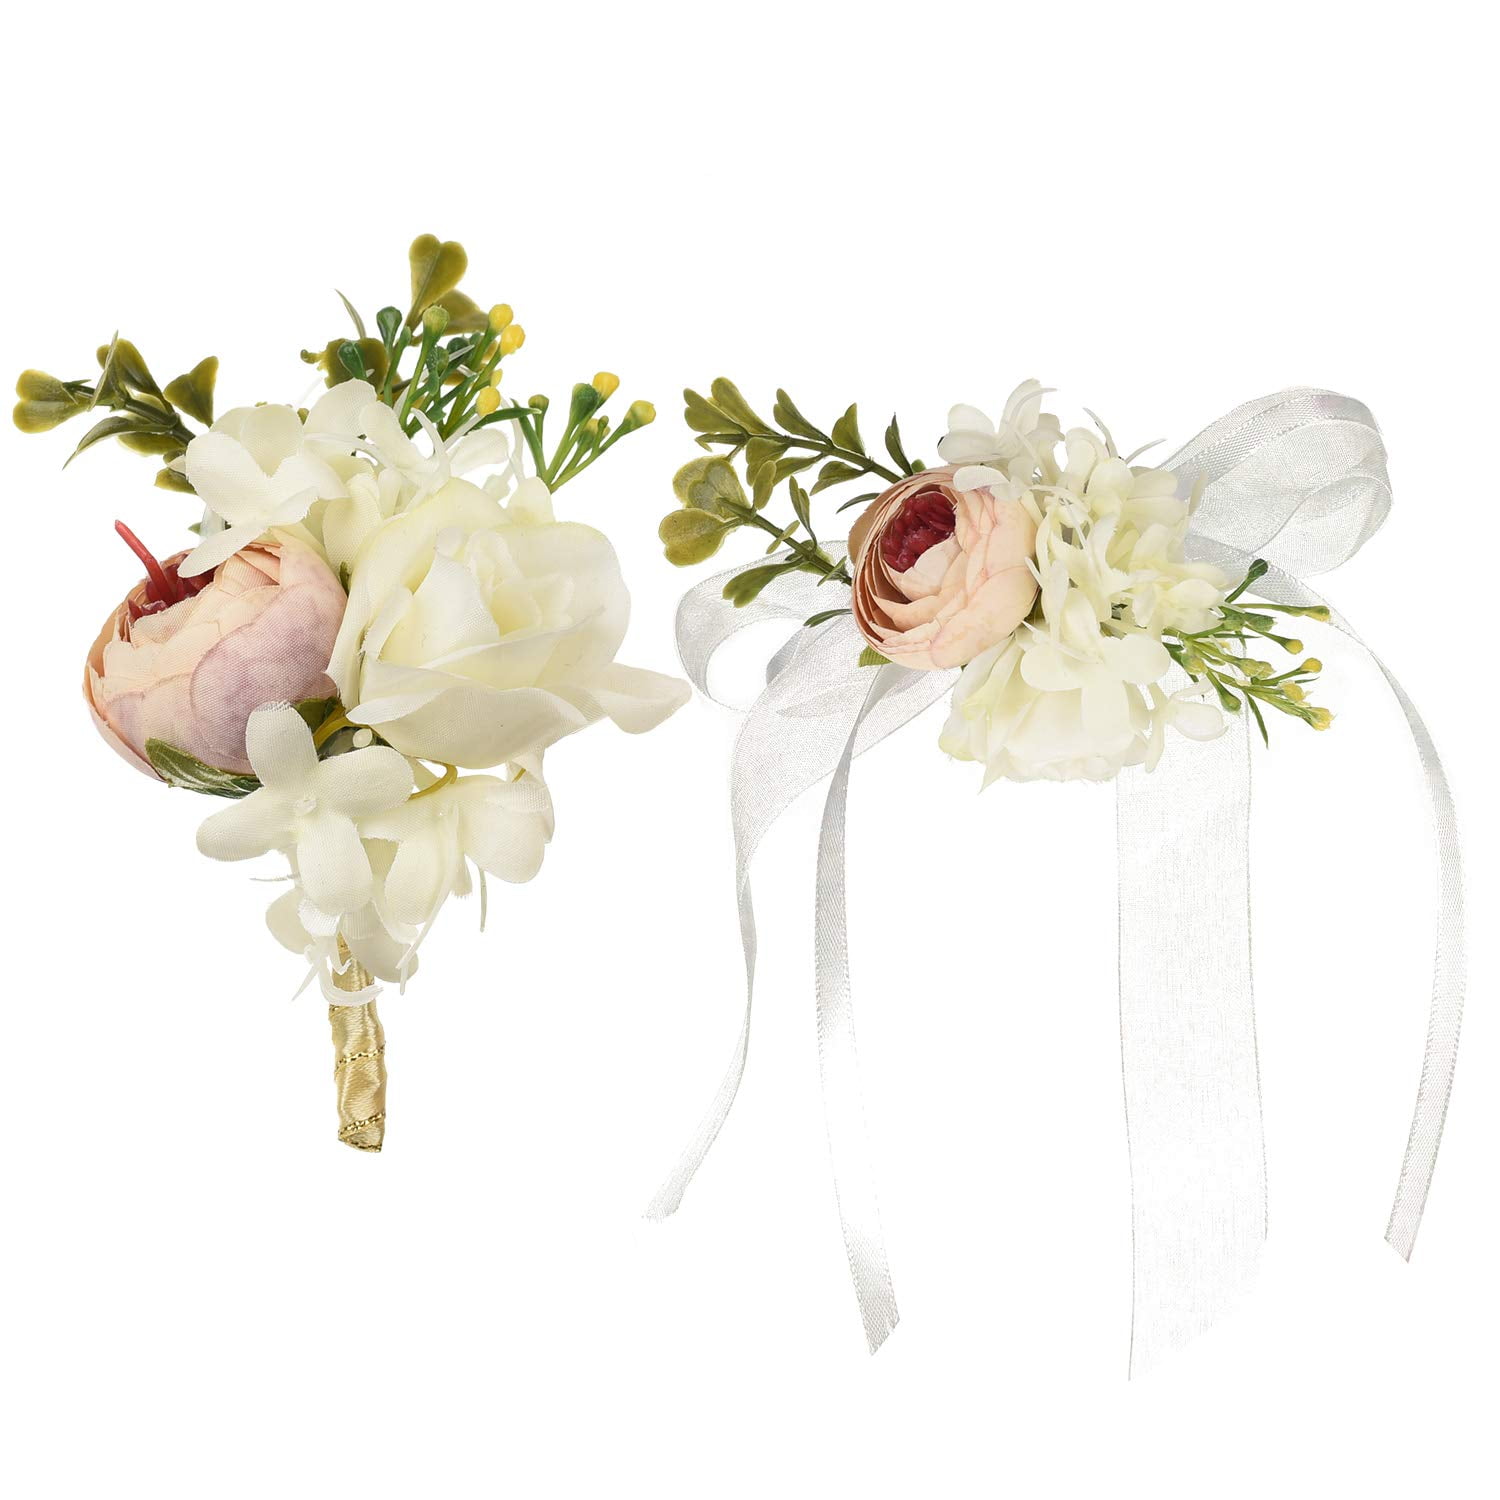 Boutonnieres White Flower Corsage Buttonhole Flowers Bridal Accessories Groom Wedding Flowers Boutonnieres Flower Corsage Flowers with Pin Bridal Groom Wedding Flowers 2pc